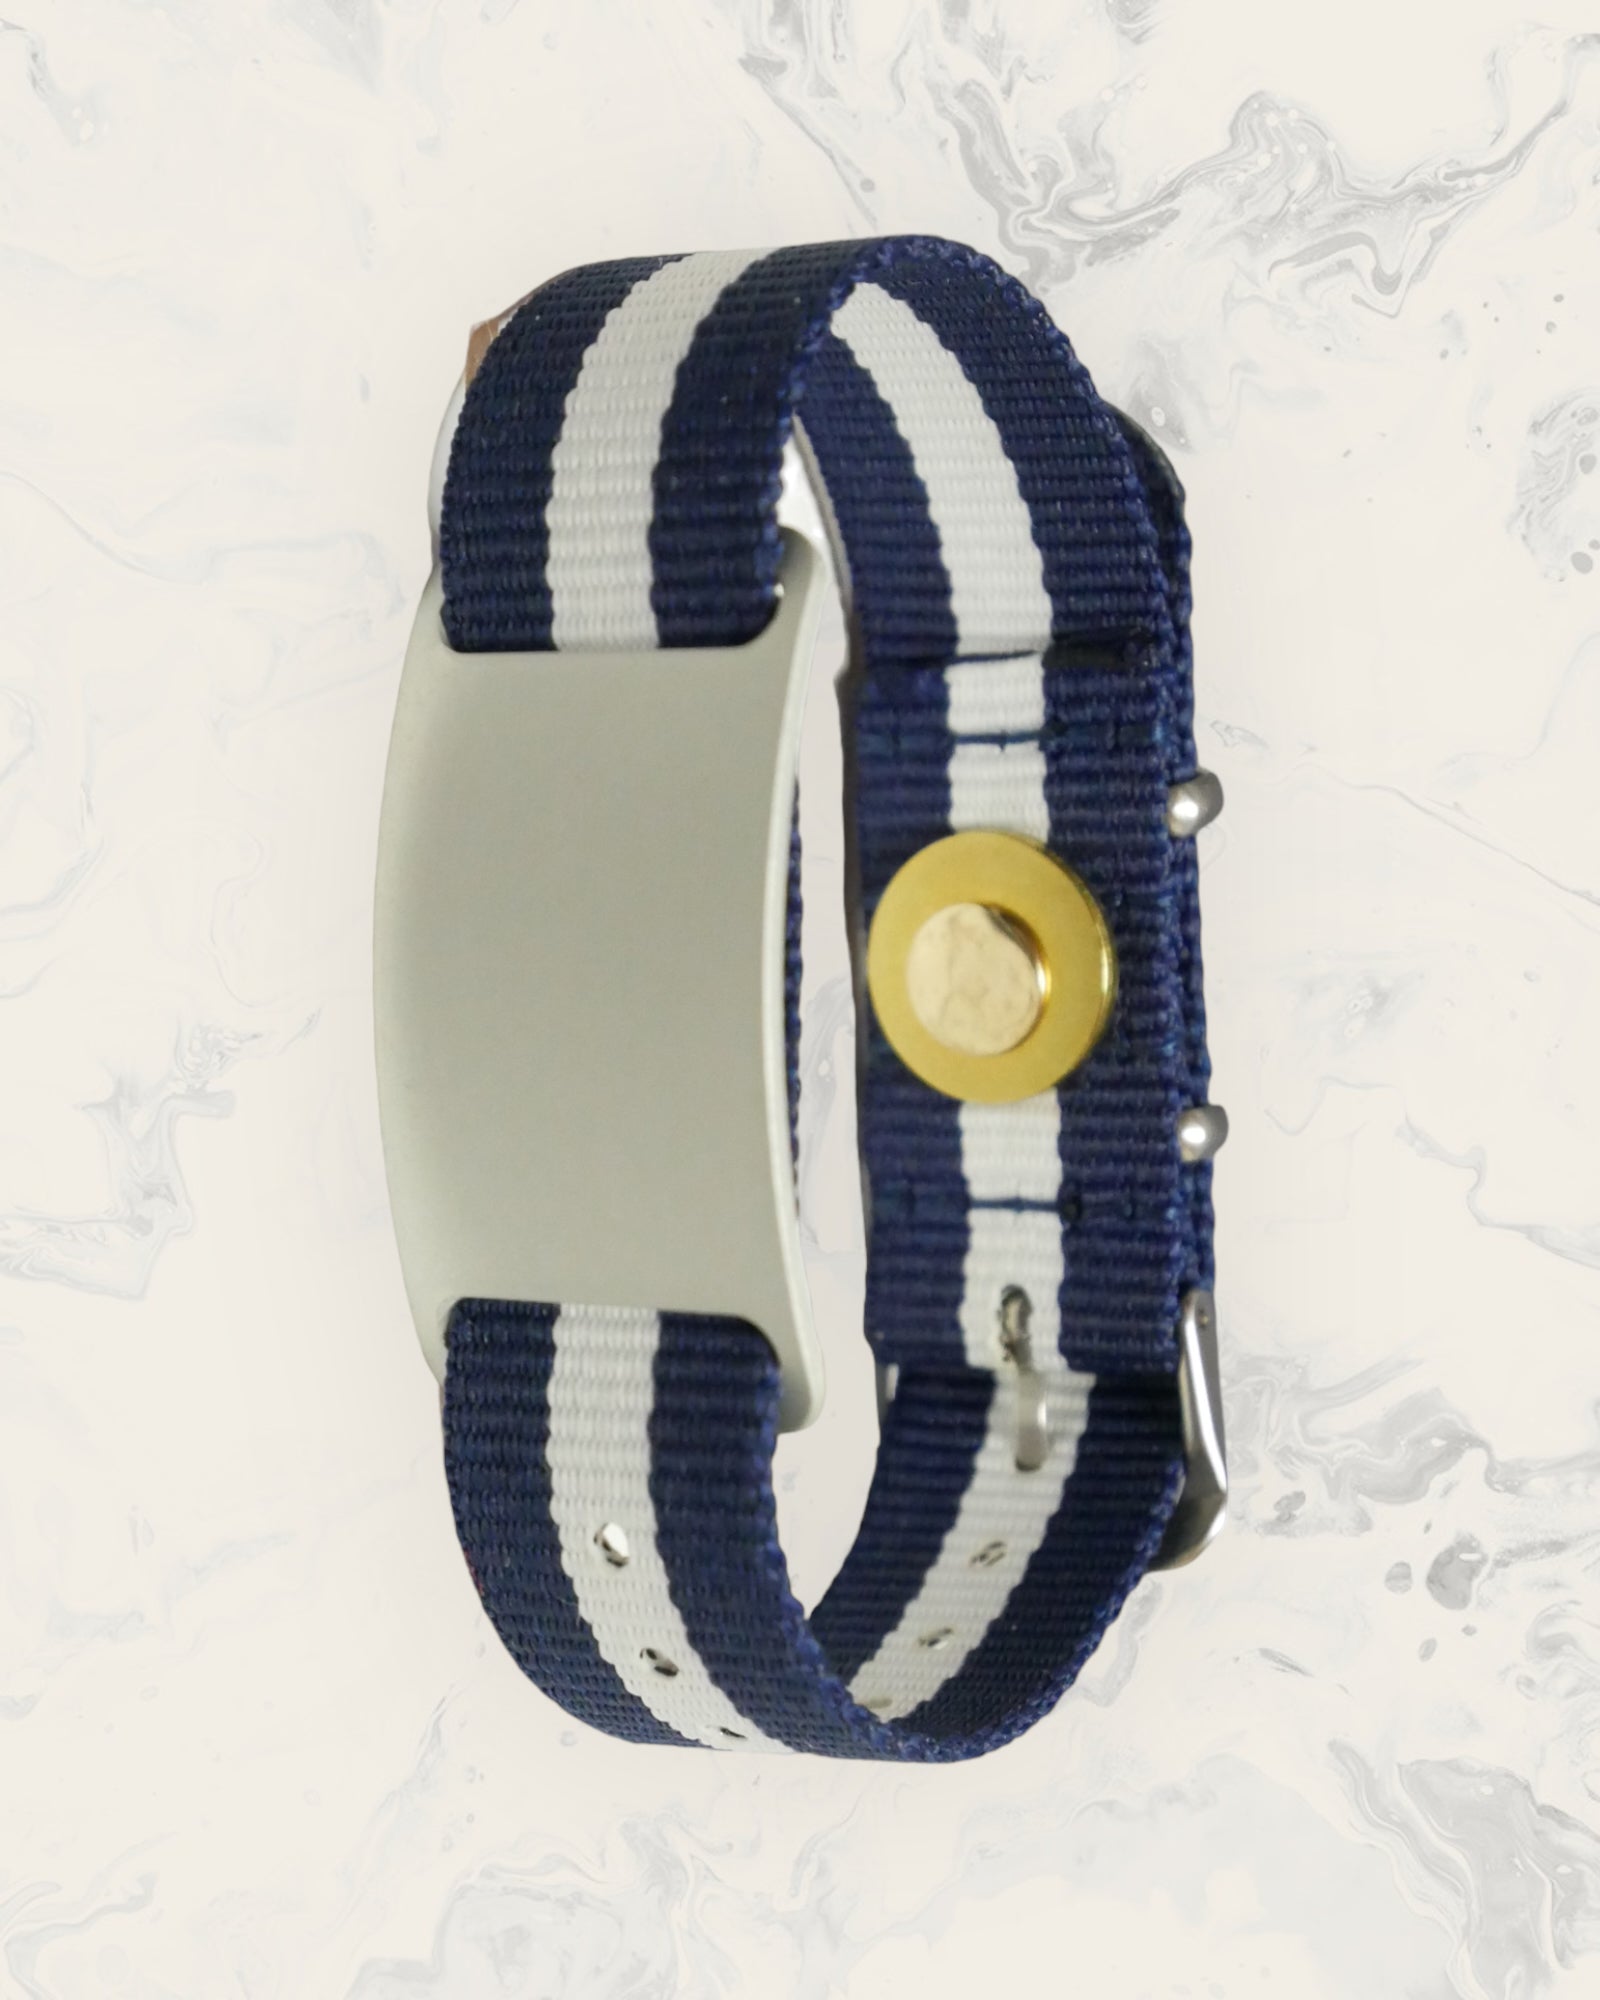 Frequency Jewelry Natural Pain Relief and EMF Protection Bracelet Nylon Band Color Navy Blue and White Striped with a Silver Slider